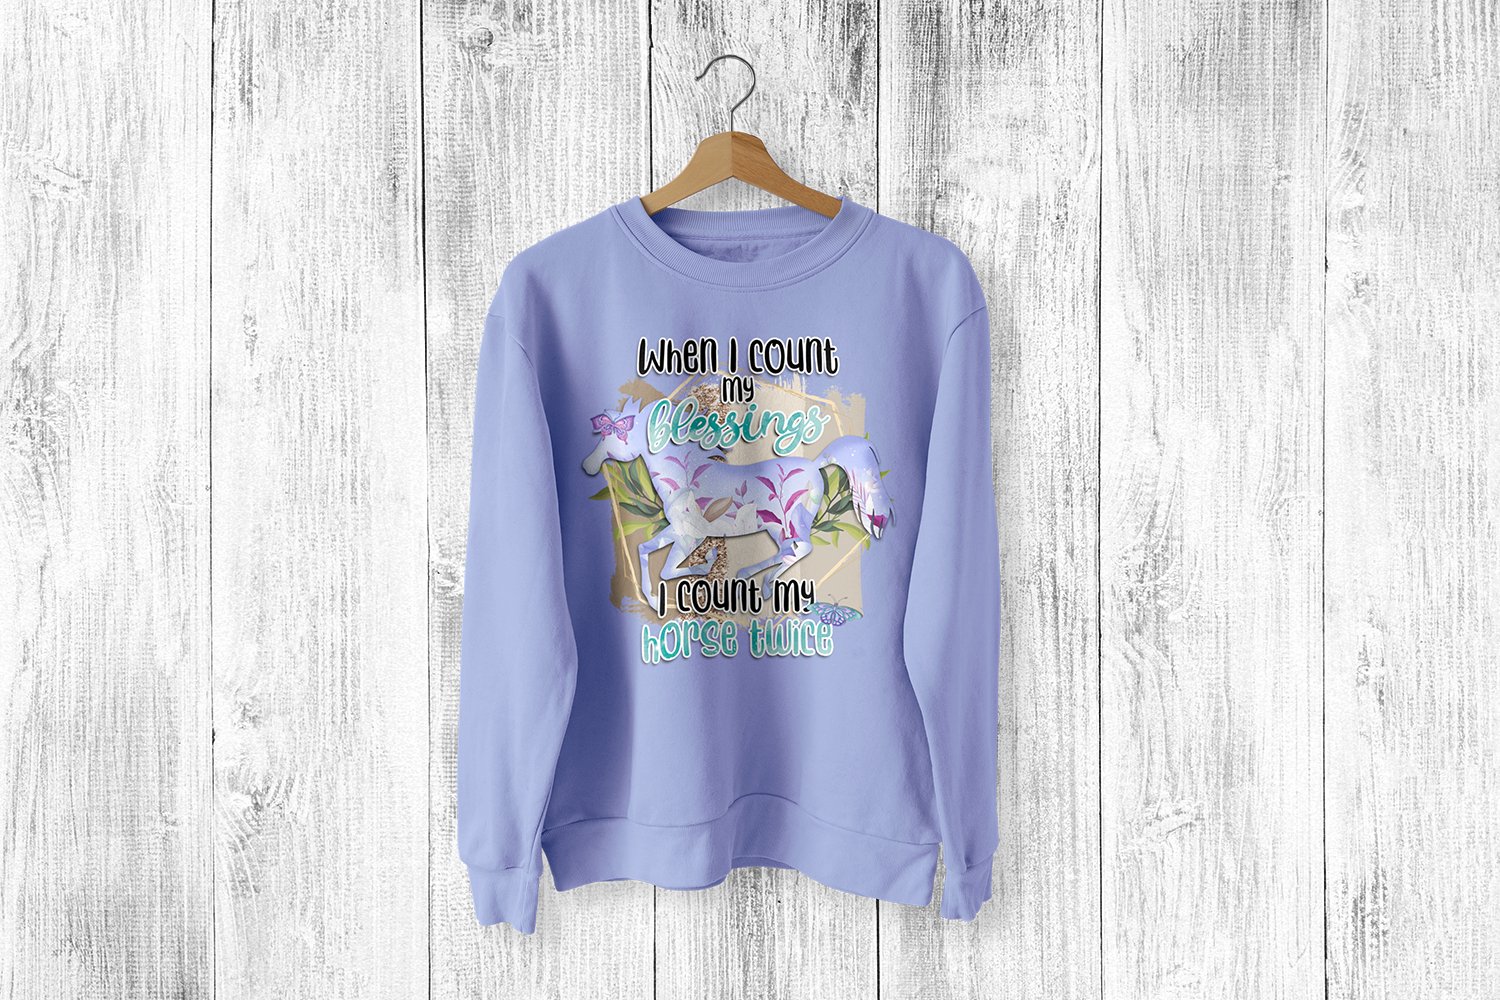 Lilac sweatshirt with big horse quote.